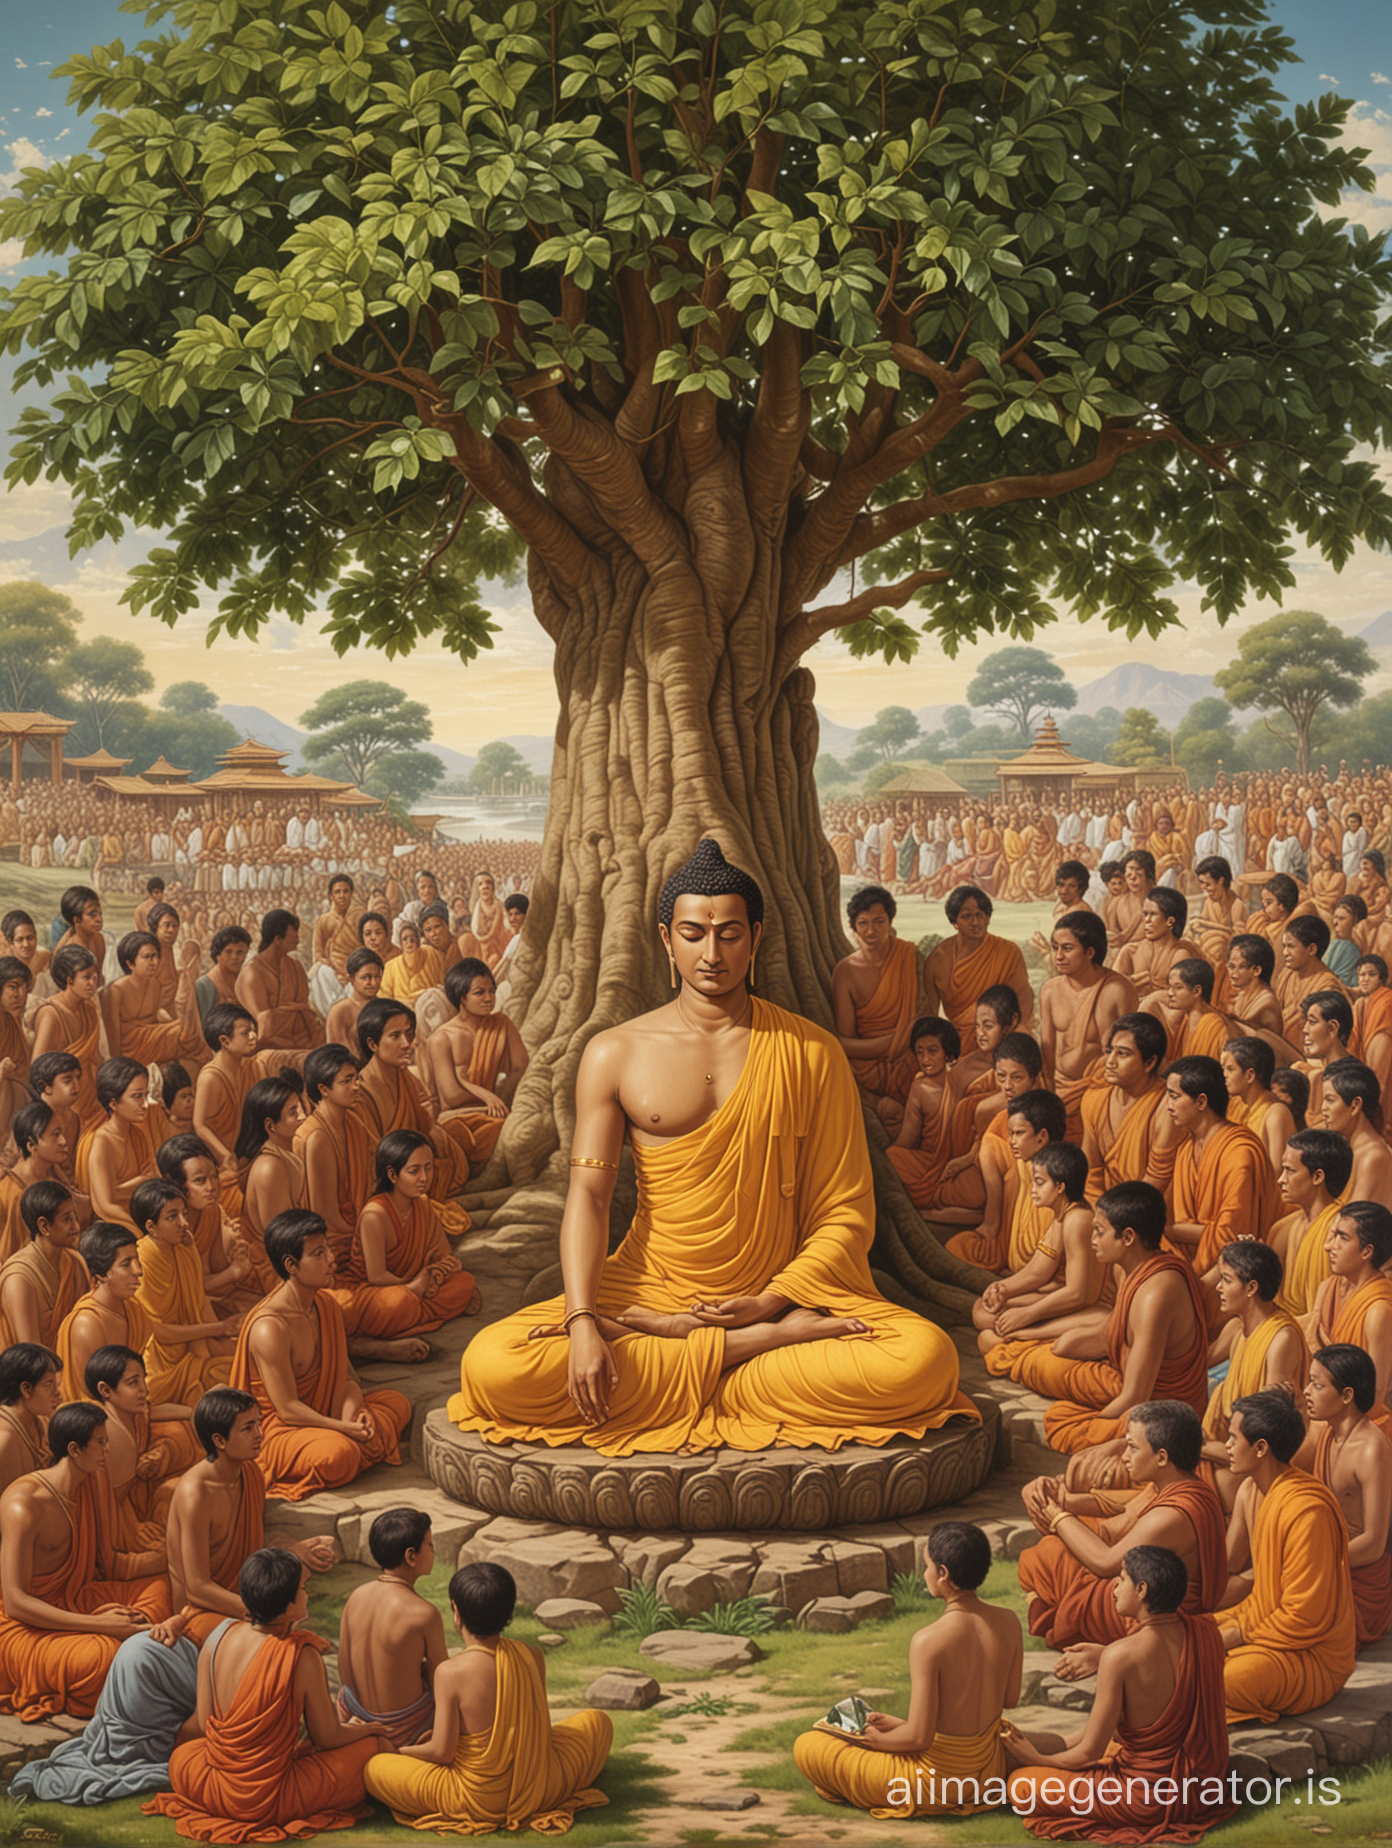 Siddhartha, seated beneath the Bodhi Tree, surrounded by followers of various backgrounds and ages, all united in peace and understanding.